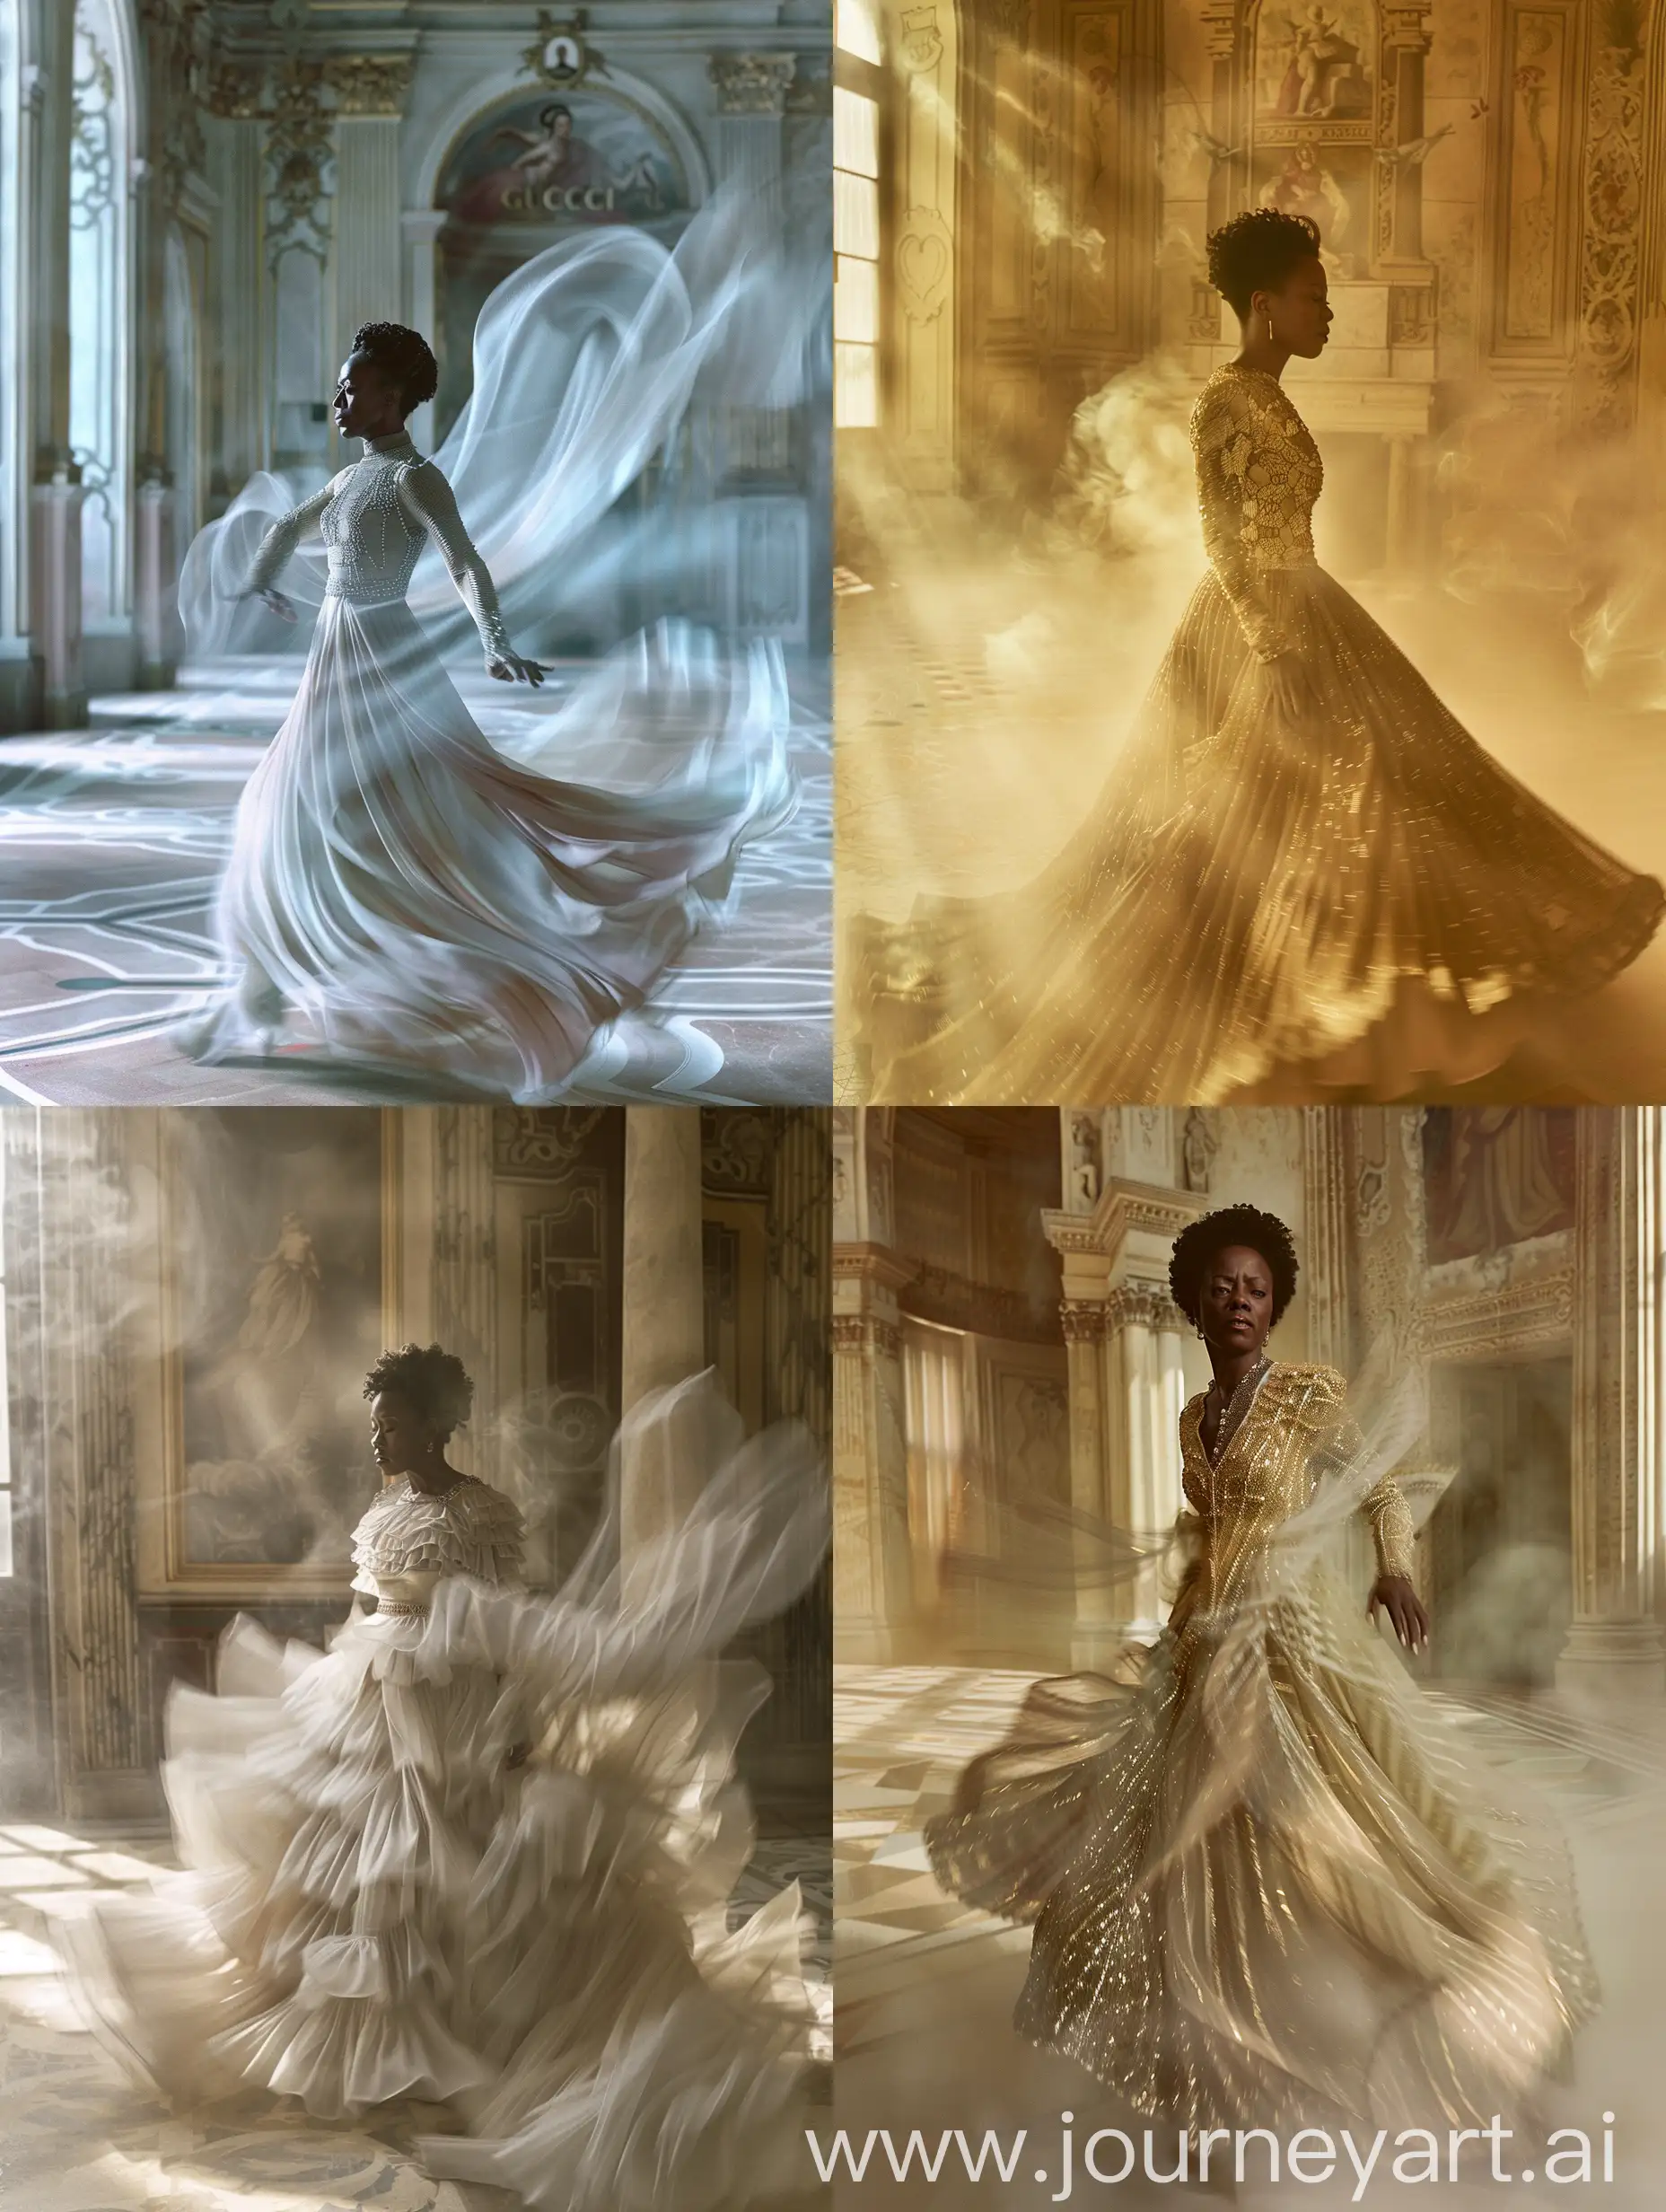 Viola Davis collaborates with Gucci in an elegant ballroom. The setting exudes grandeur and refinement, echoing her character's stature and sophistication. The photography style gracefully captures dynamic movement, enhanced by fashion film techniques such as LUT, camera blur, and haze effects. High-resolution images accentuate the luxurious textures of the clothing and intricate lighting, spotlighting the meticulous details of the technical textile.